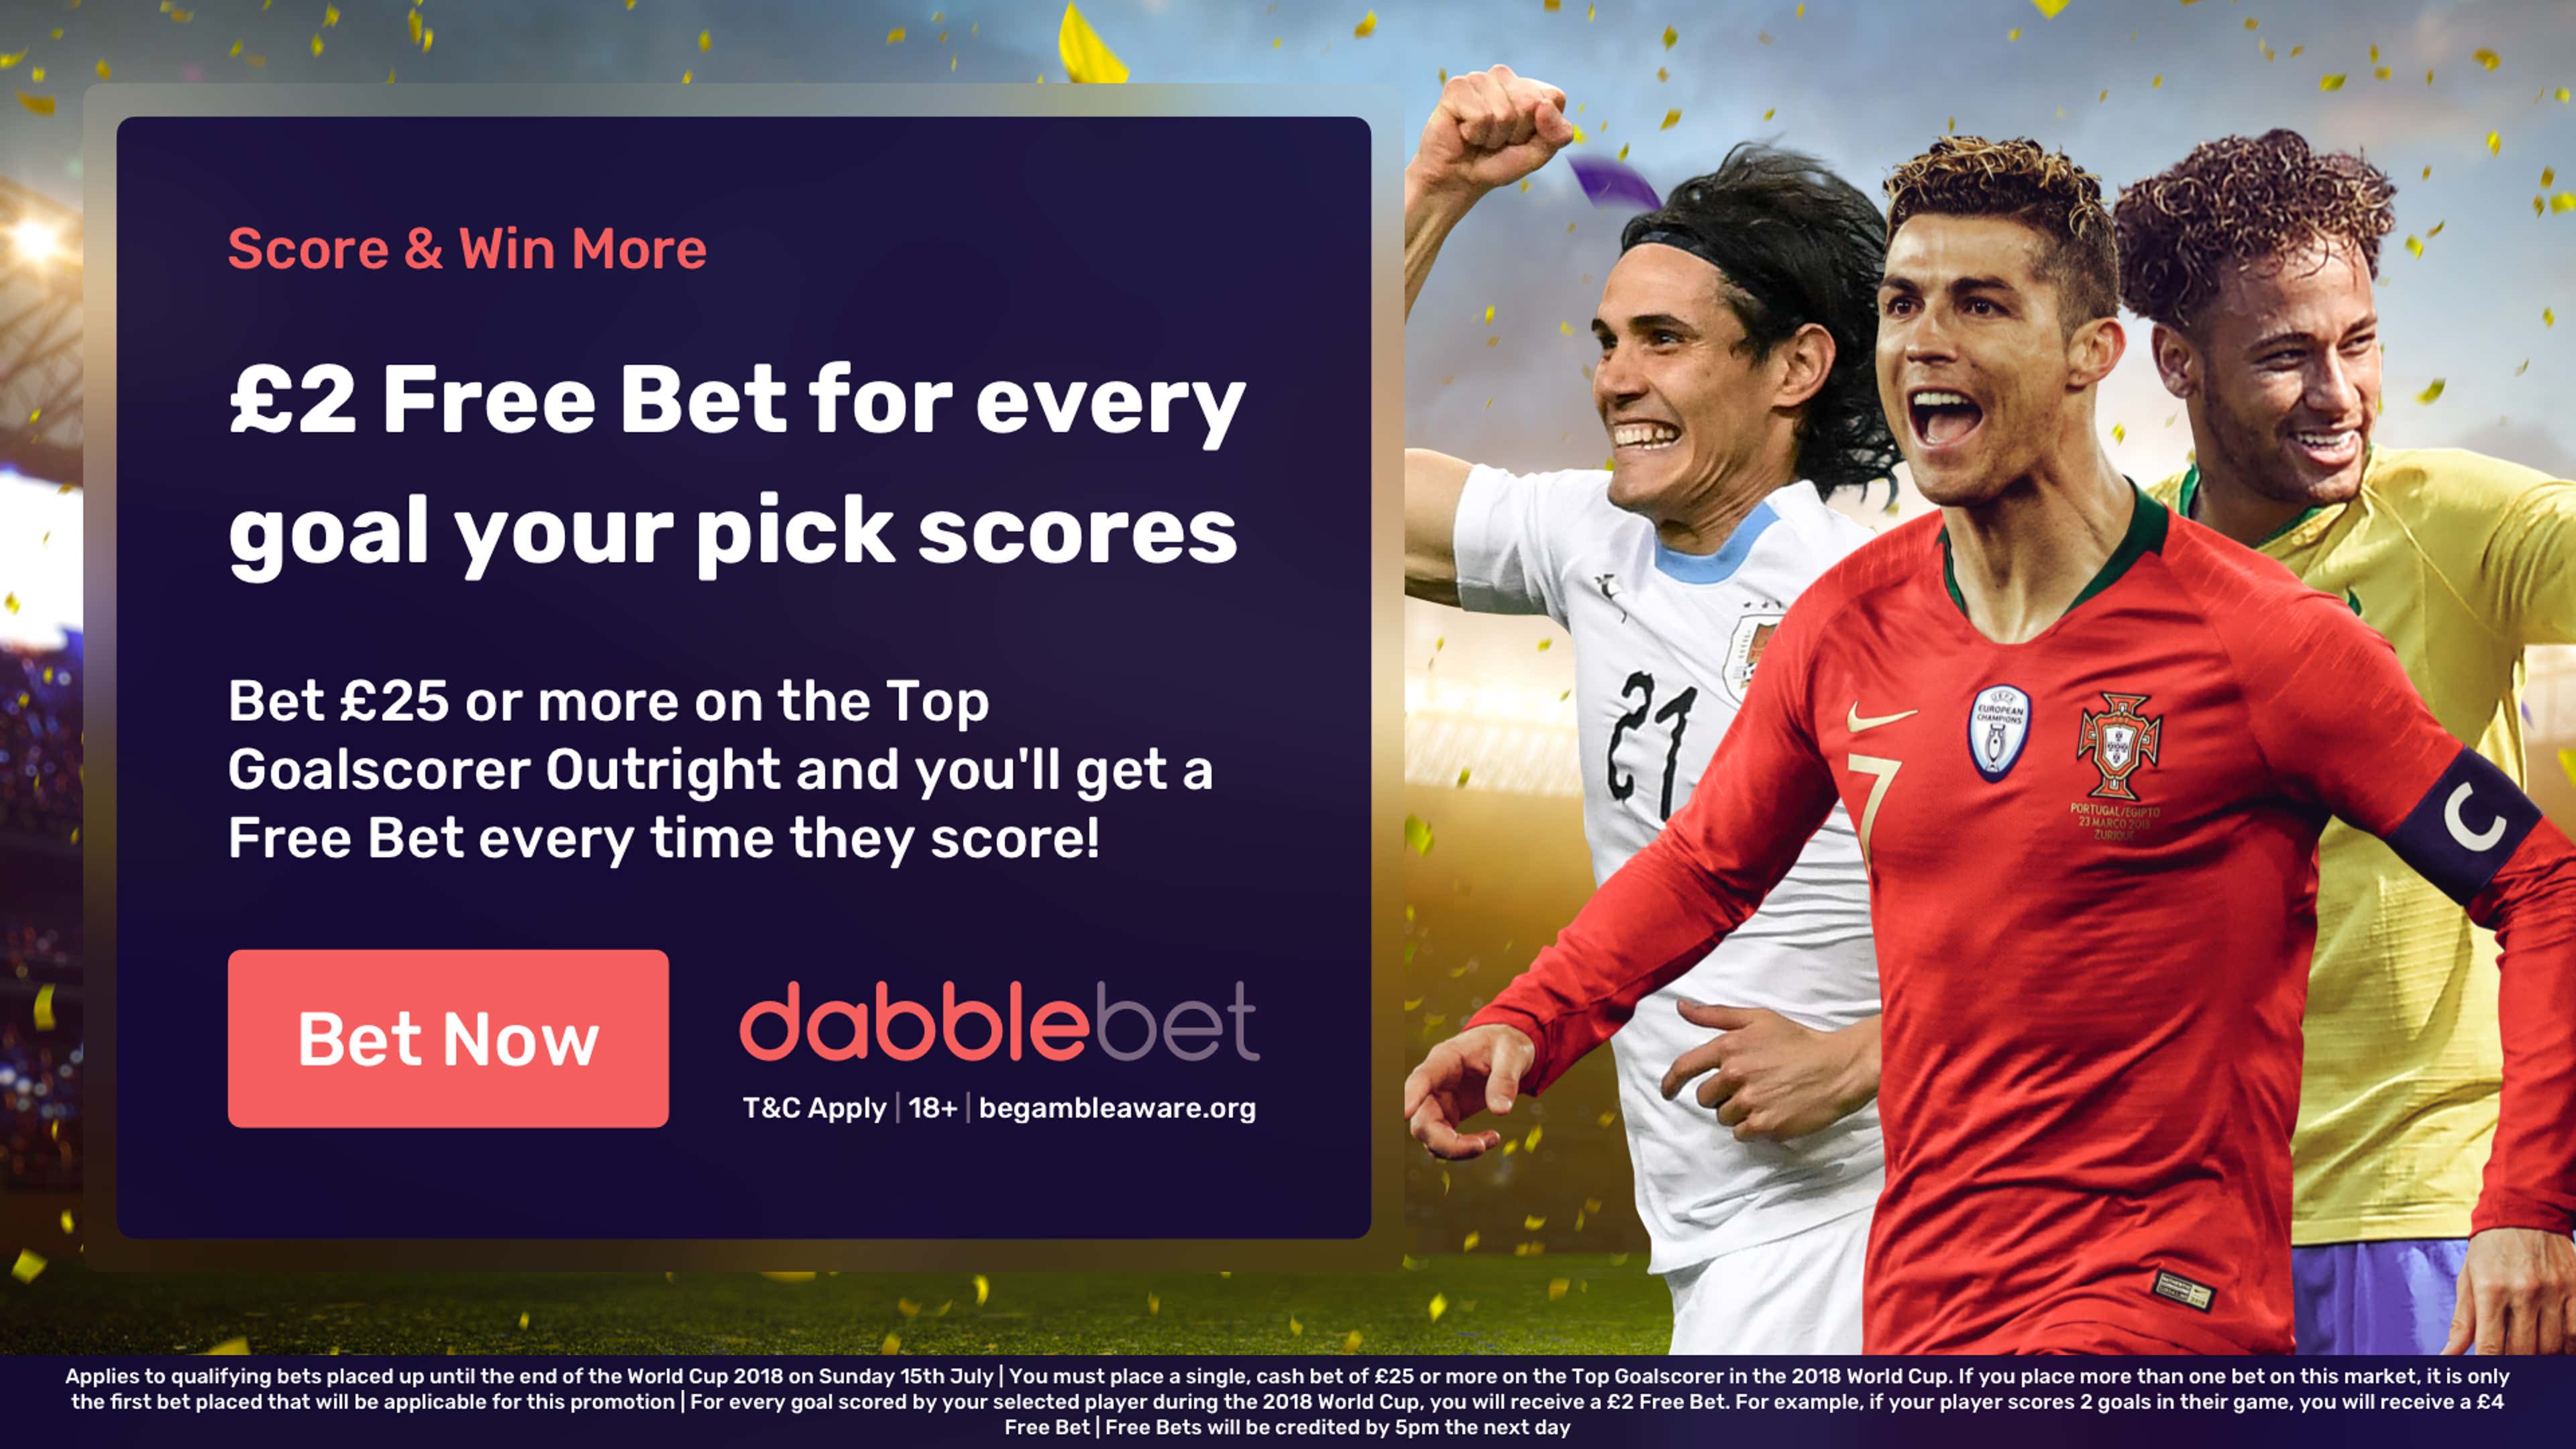 dabblebet score more win more offer in article